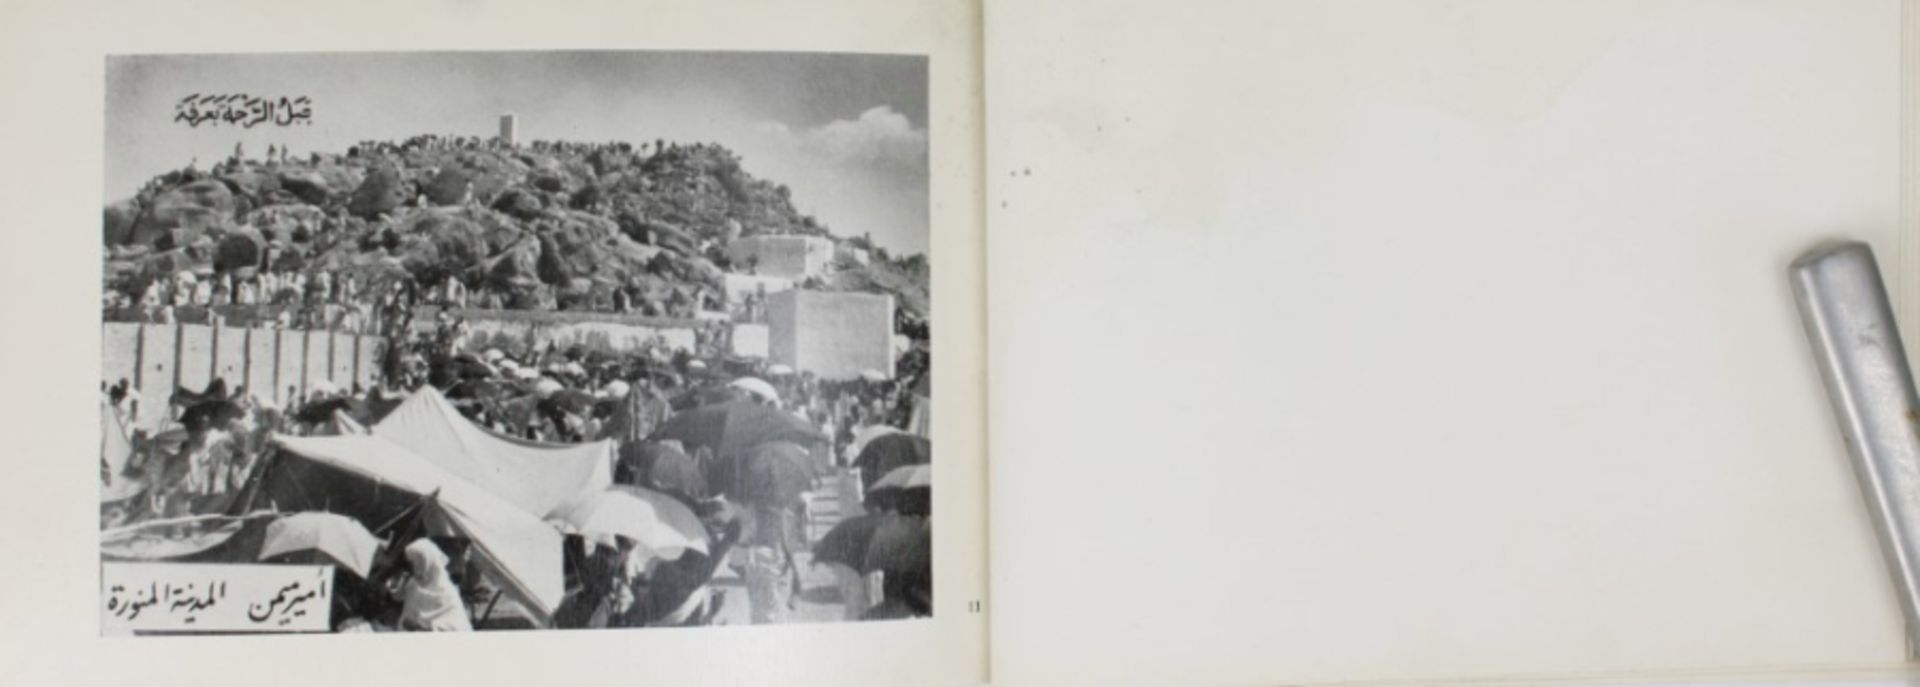 1930 Album with photographs of Mecca - Image 5 of 24